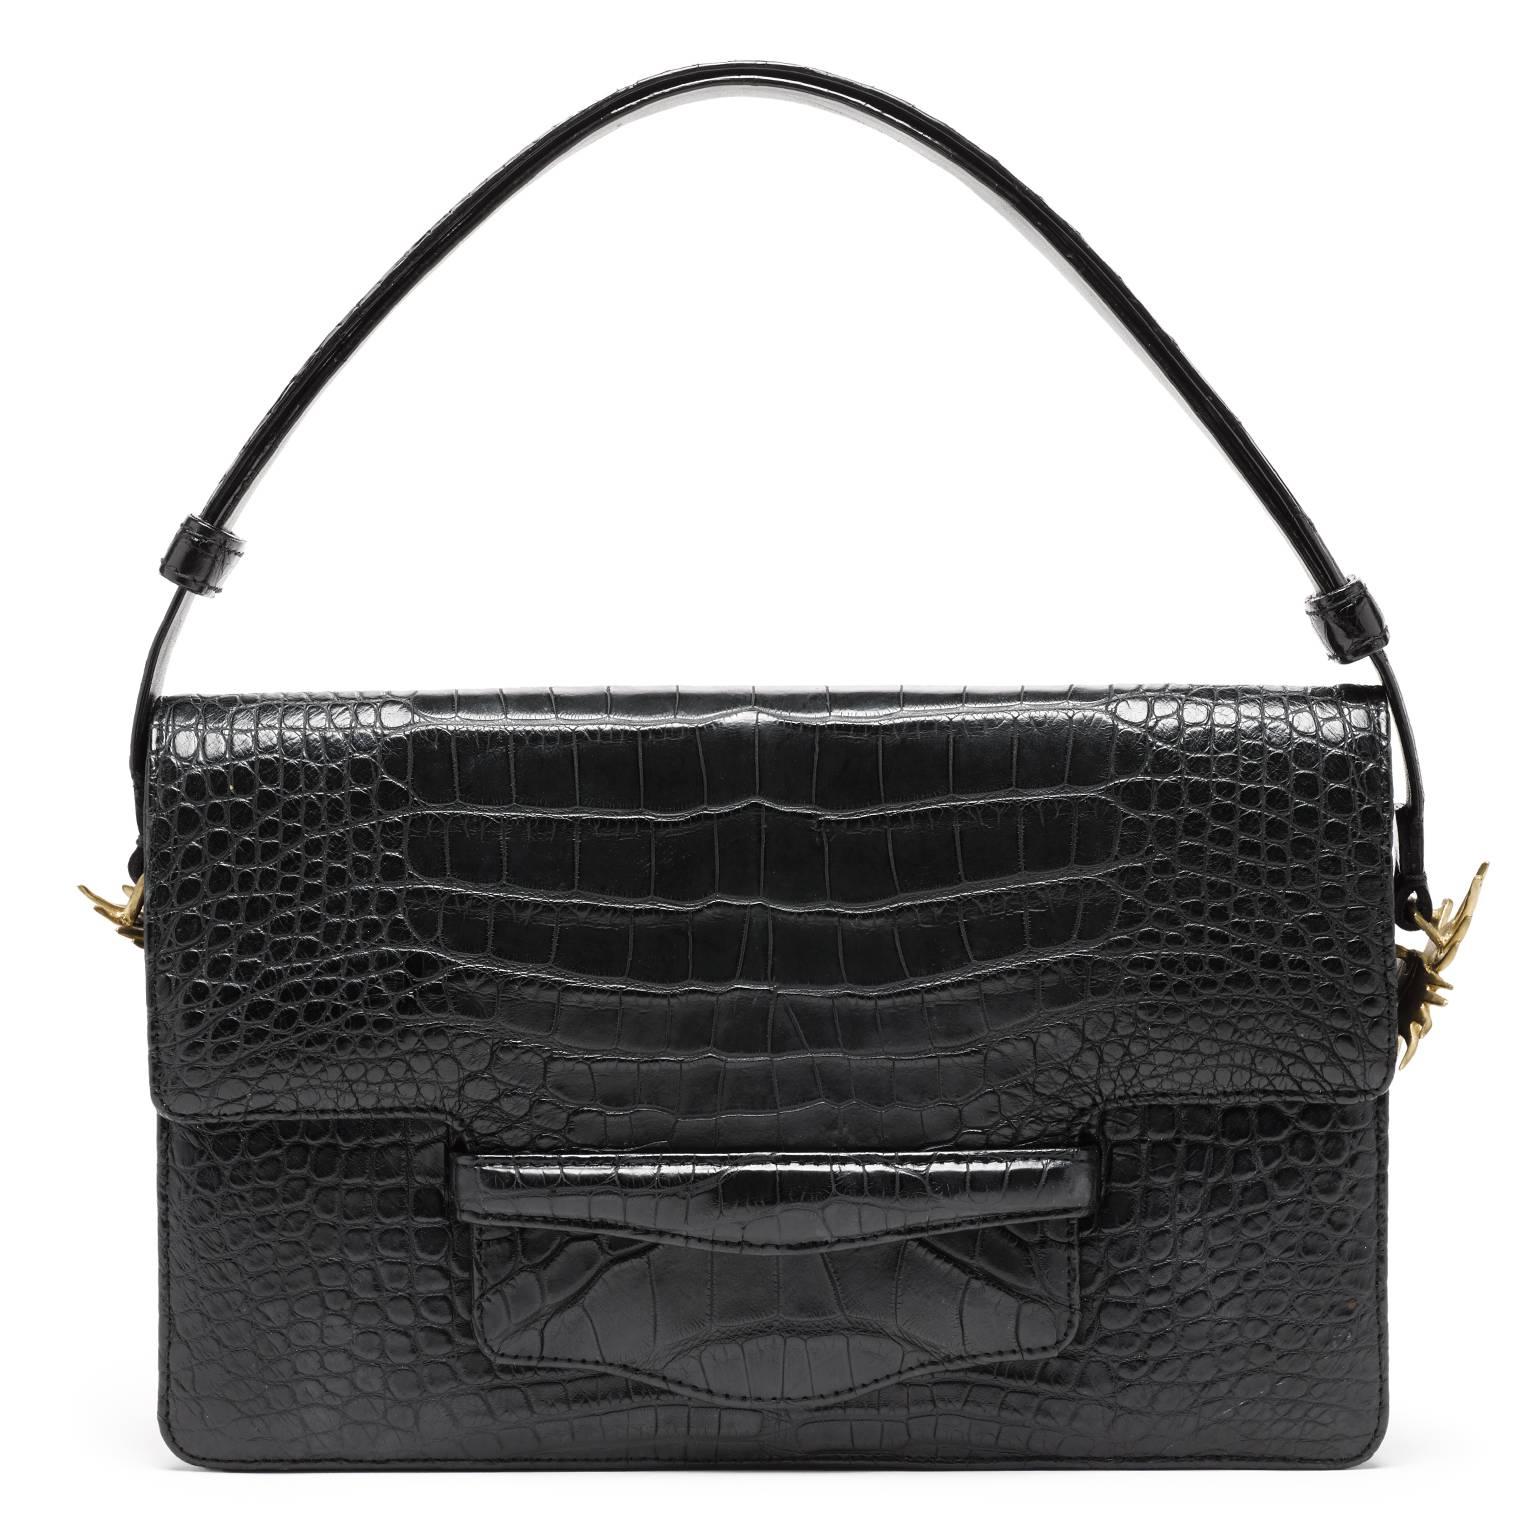 Alligator Clutch Black Handbag with detachable adjustable strap  In New Condition For Sale In New York, NY